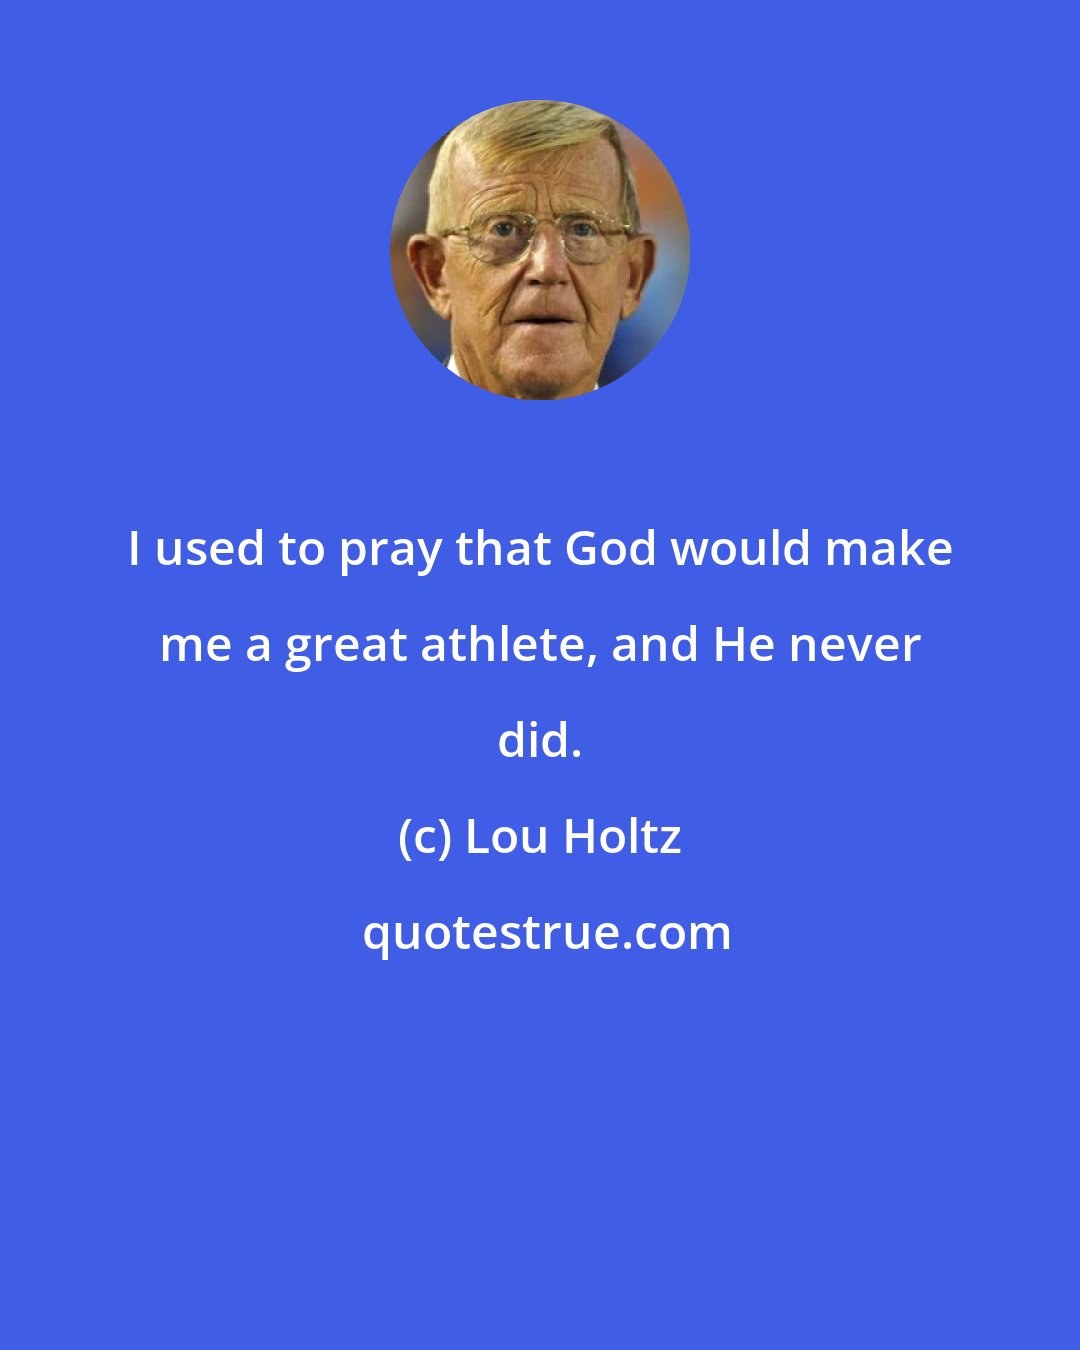 Lou Holtz: I used to pray that God would make me a great athlete, and He never did.